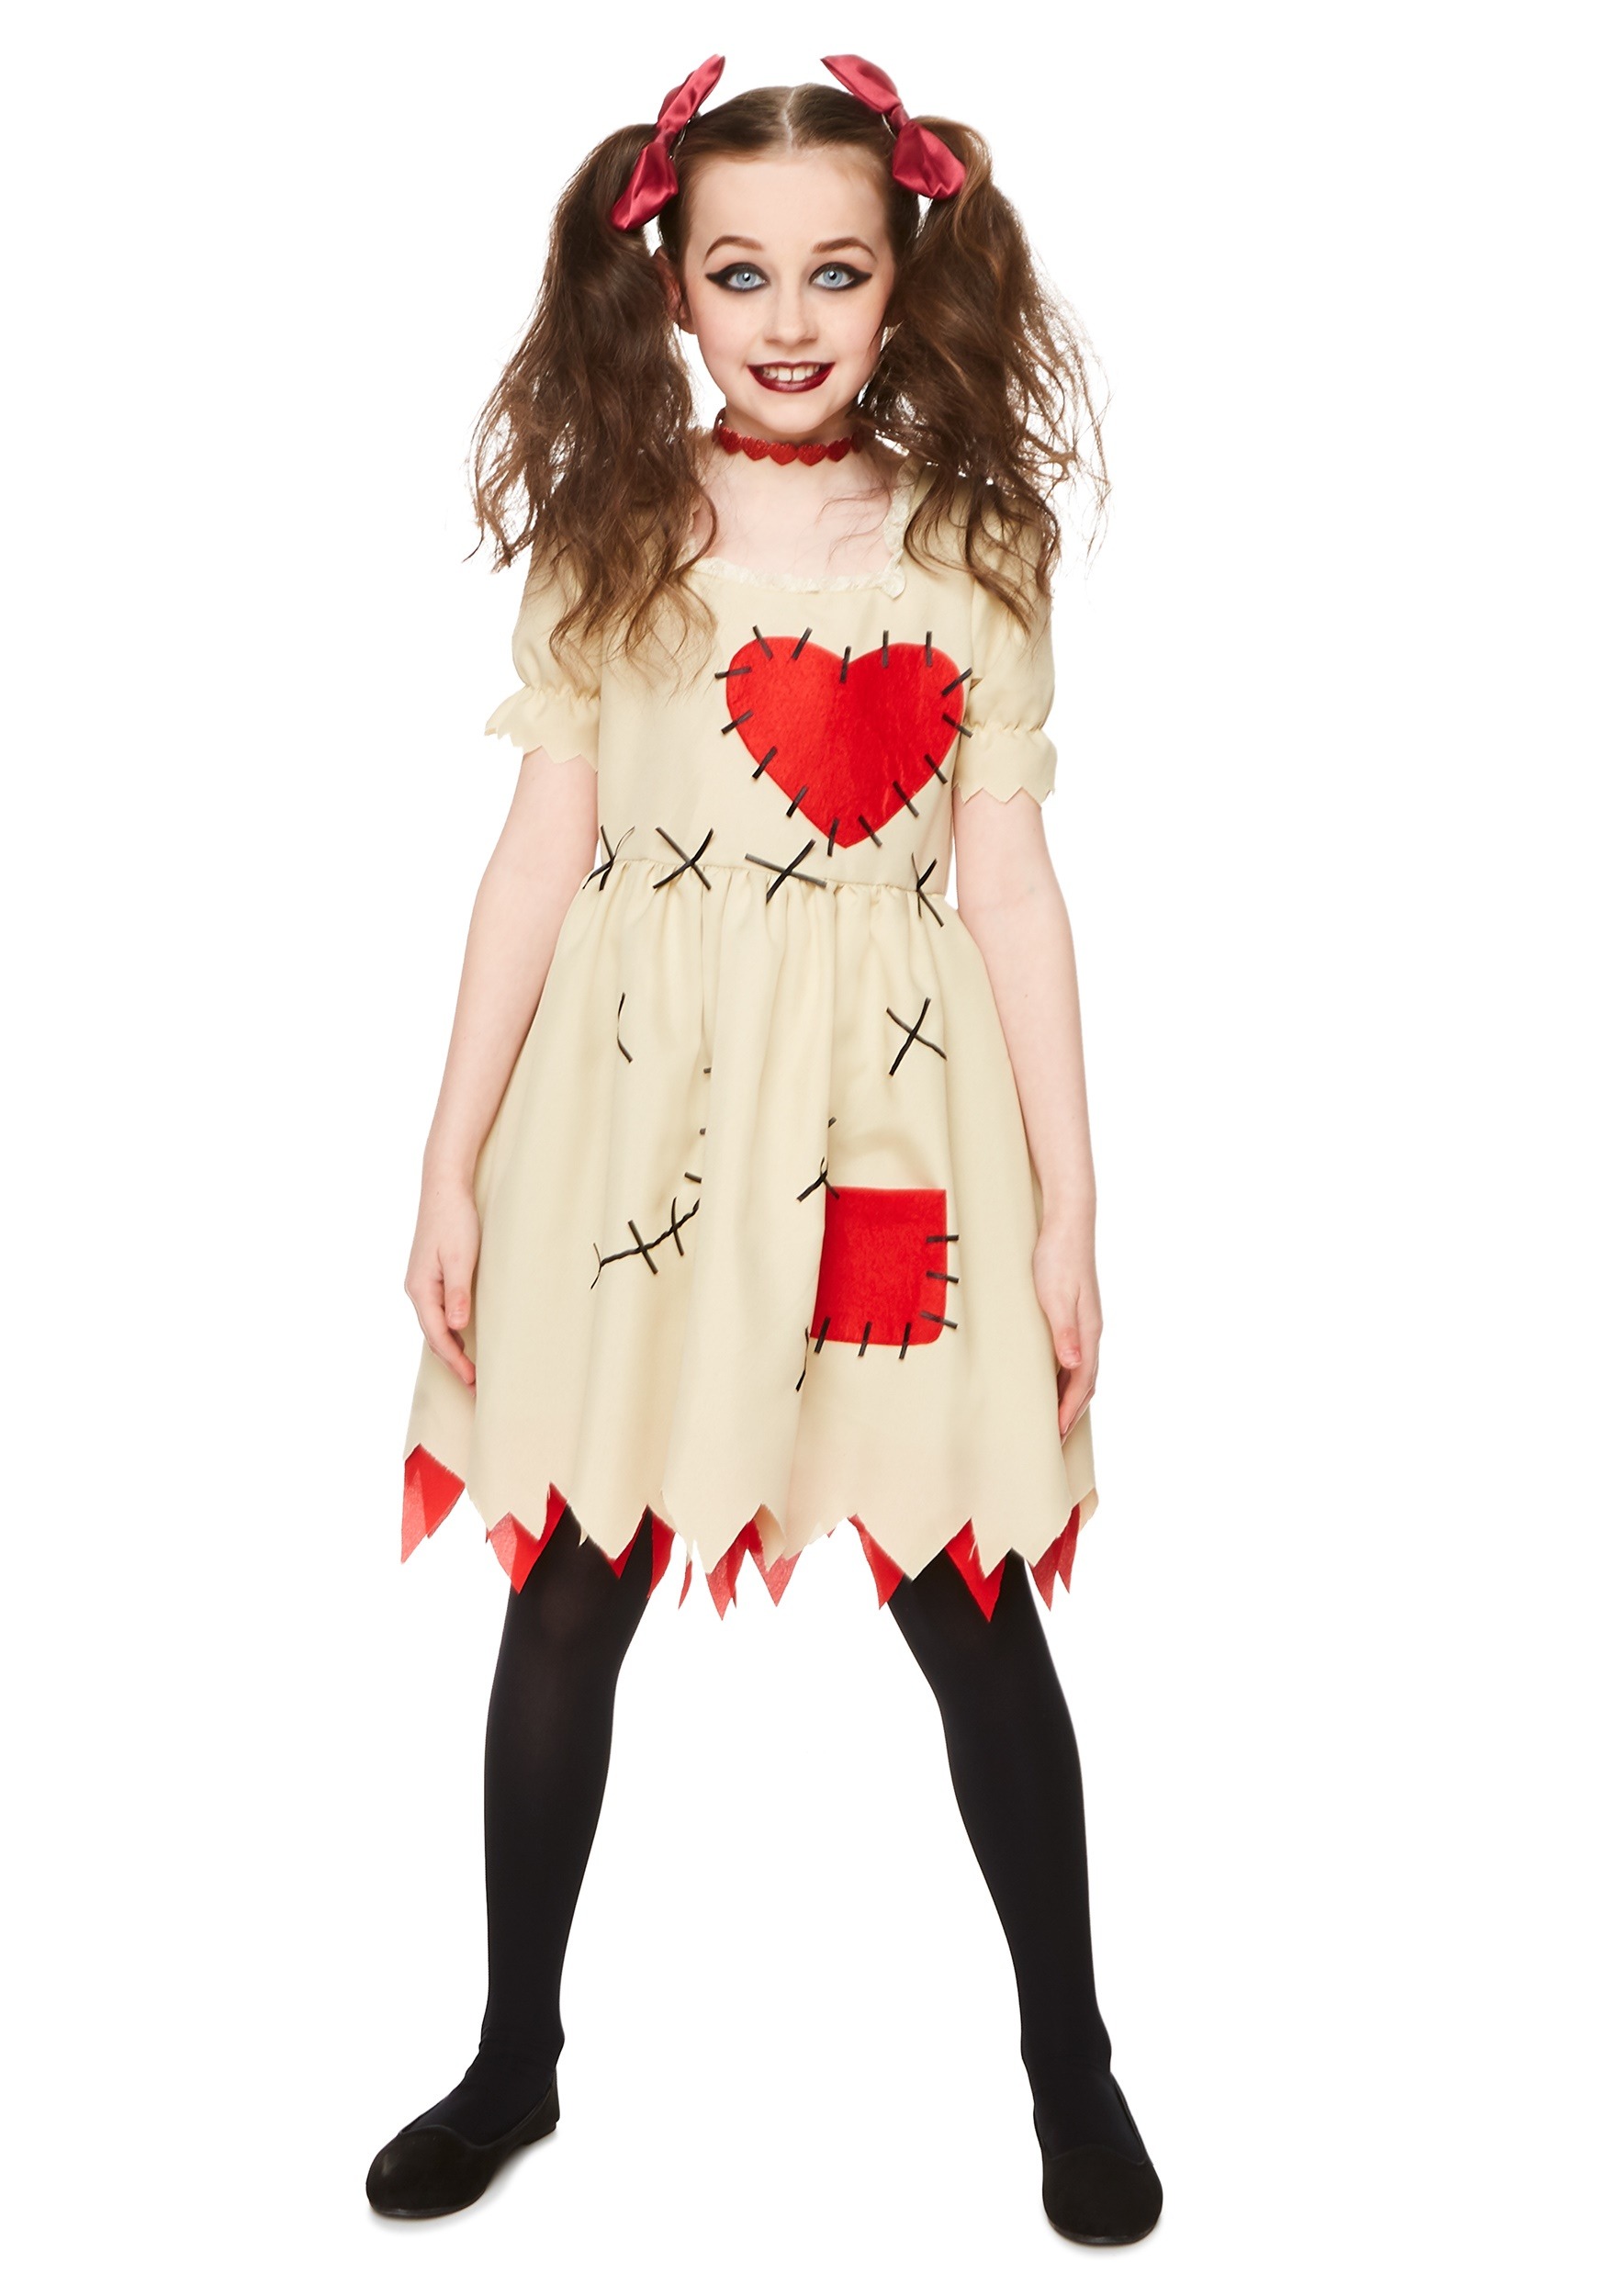 Voodoo Doll Costume for Girls